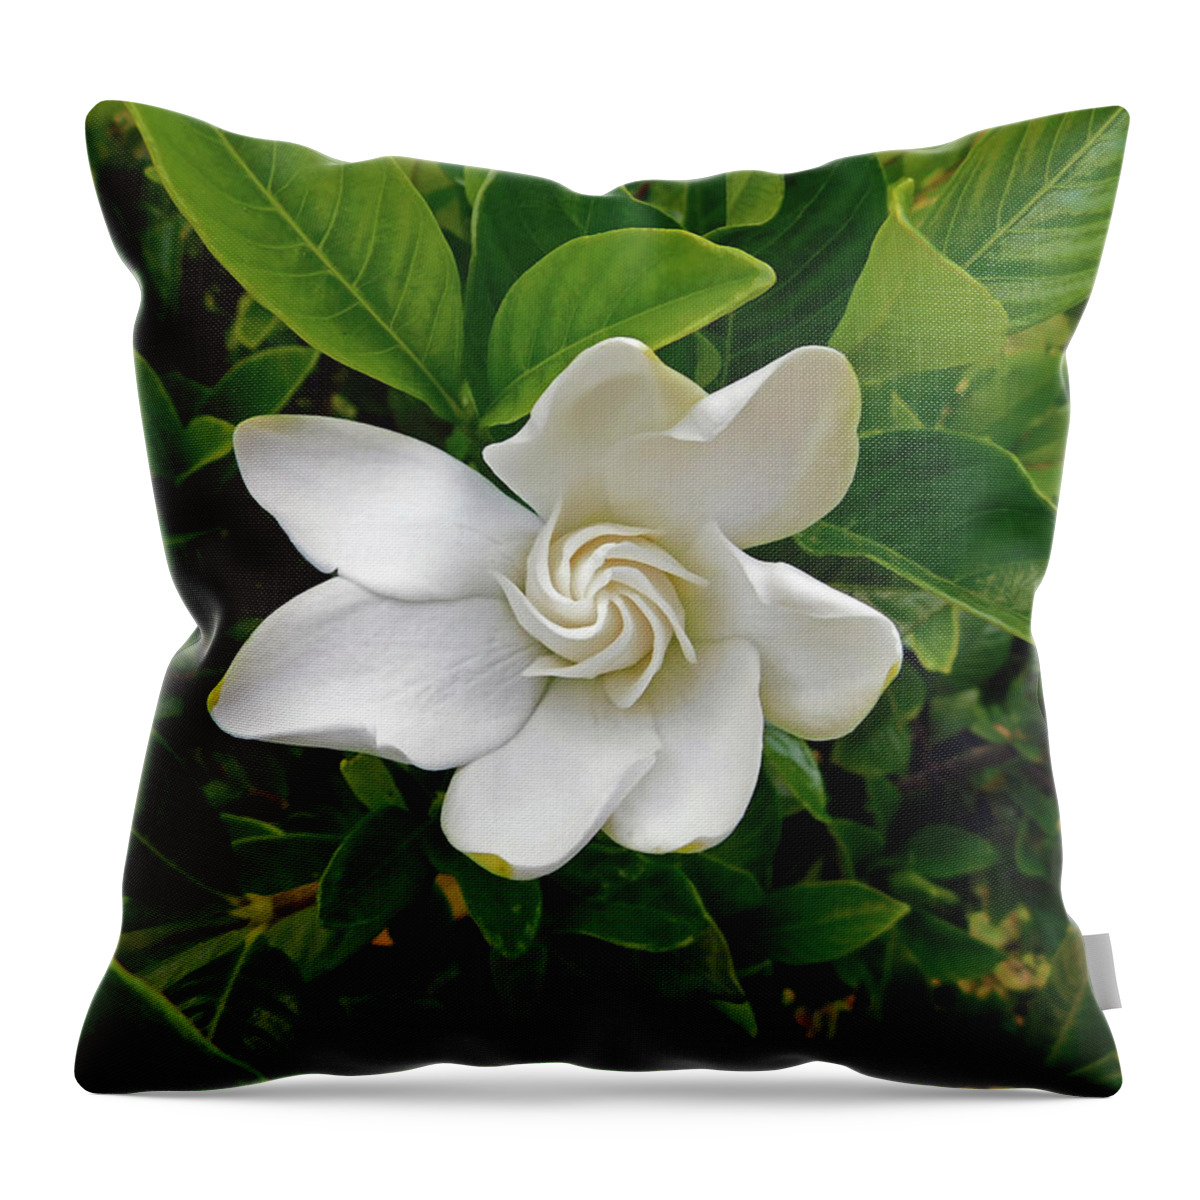 Flower Throw Pillow featuring the photograph Gardenia Bloom by Carl Moore